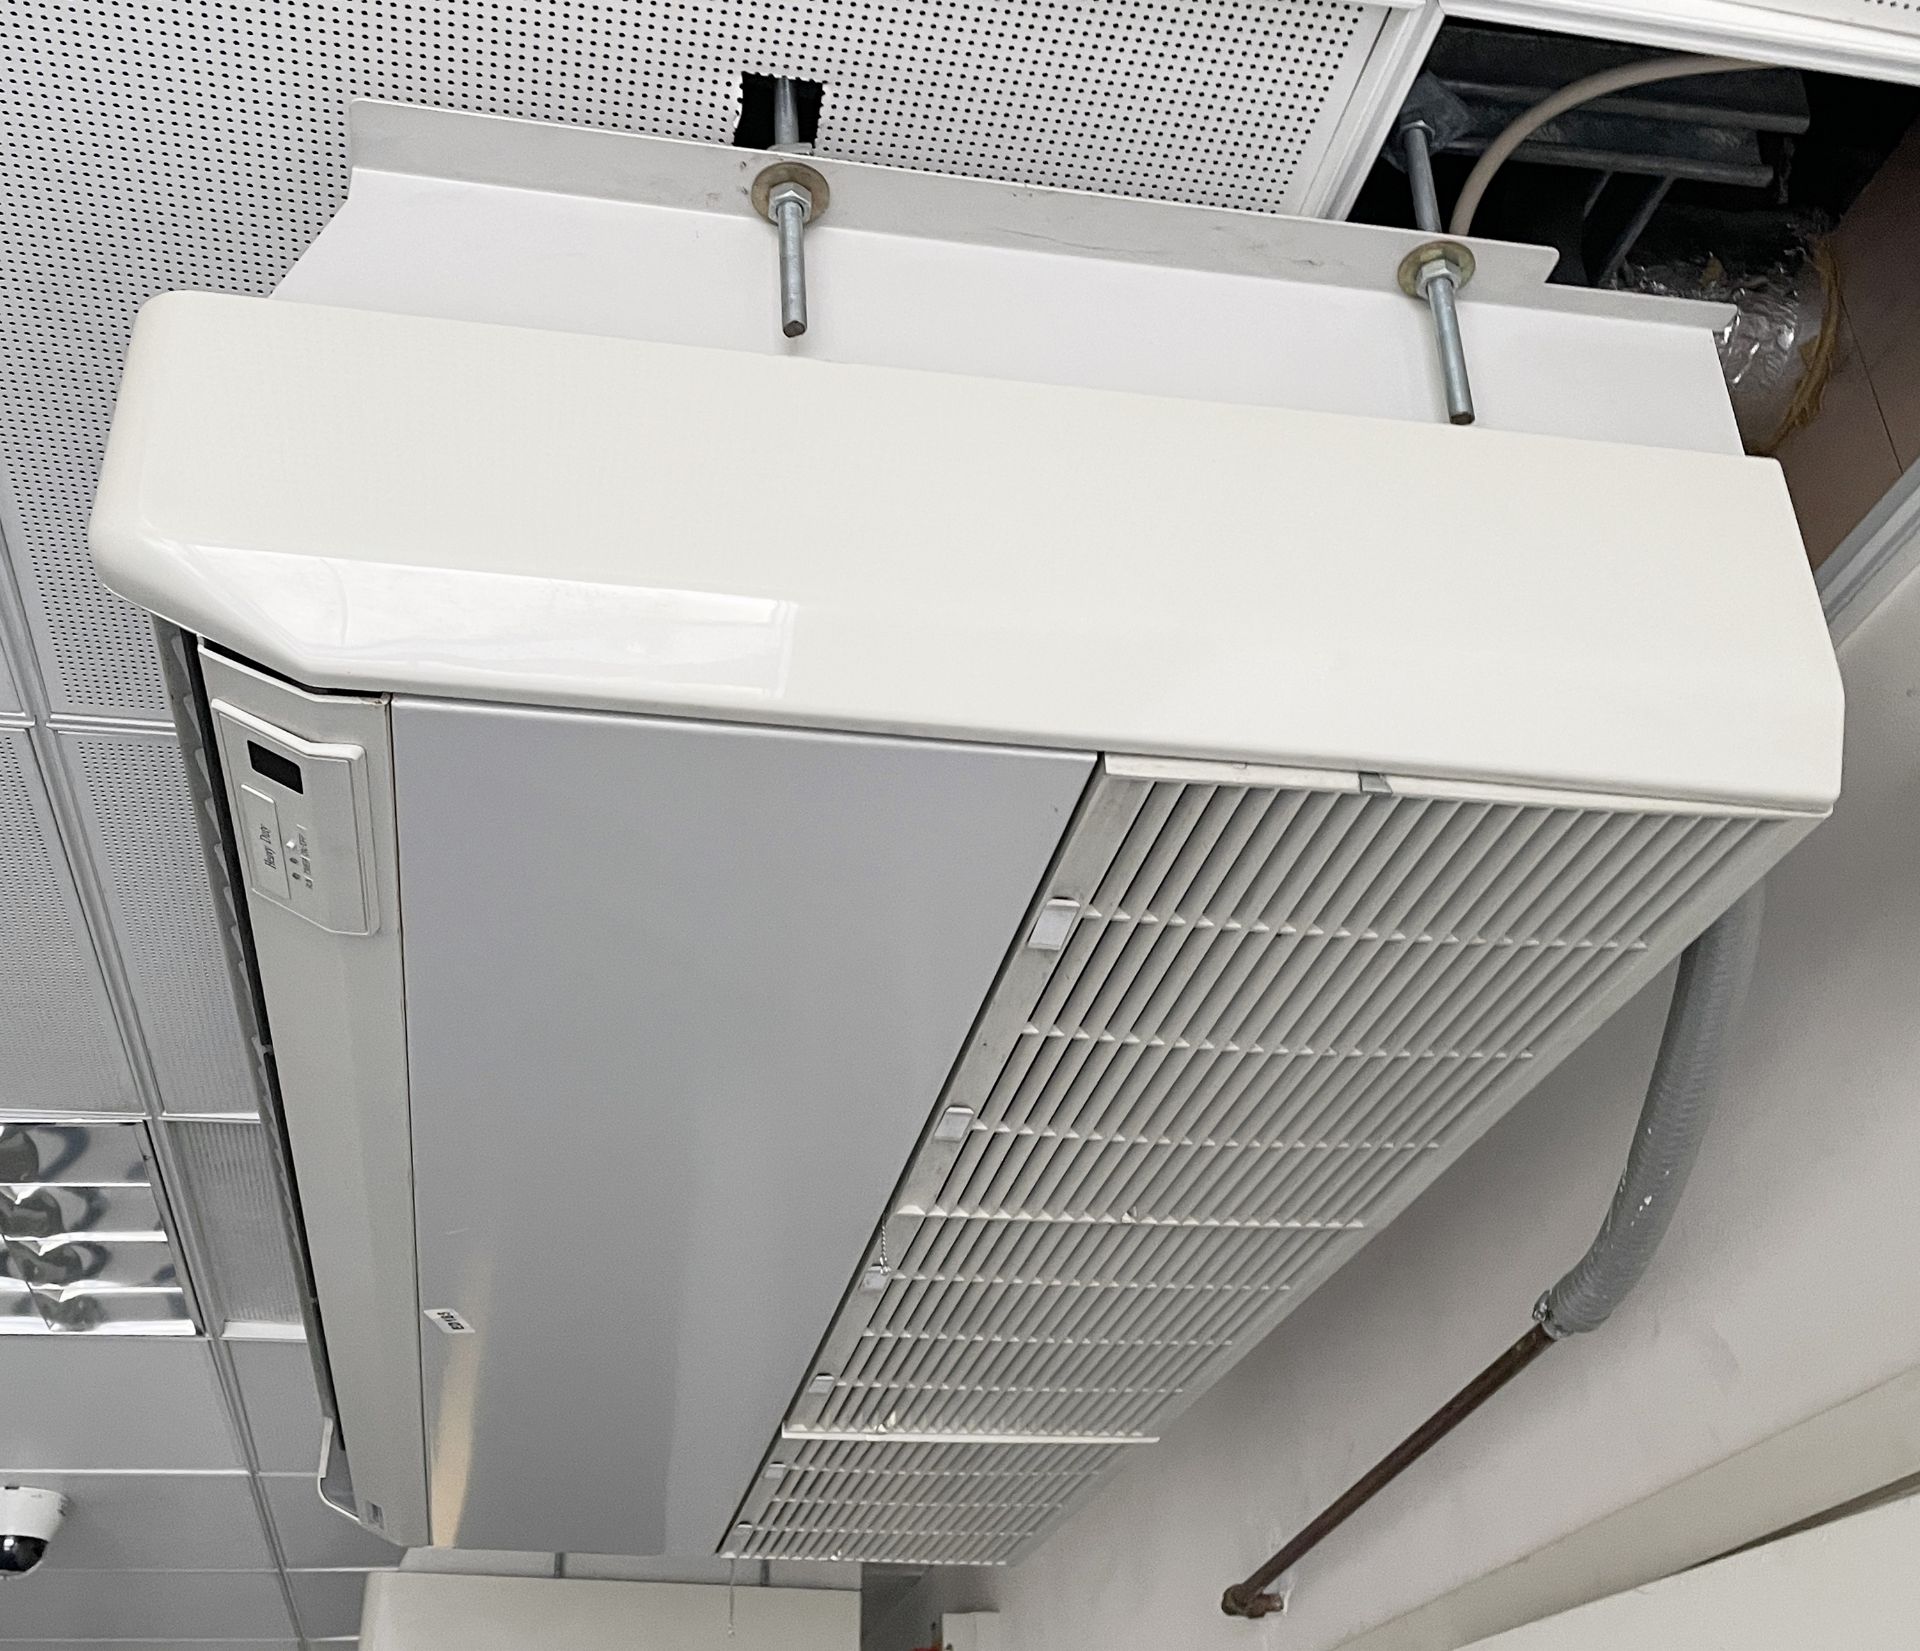 1 x Mitsubishi Heavy Duty Ceiling Mounted Air Conditioning Unit - Ref: ED185 - Image 4 of 4